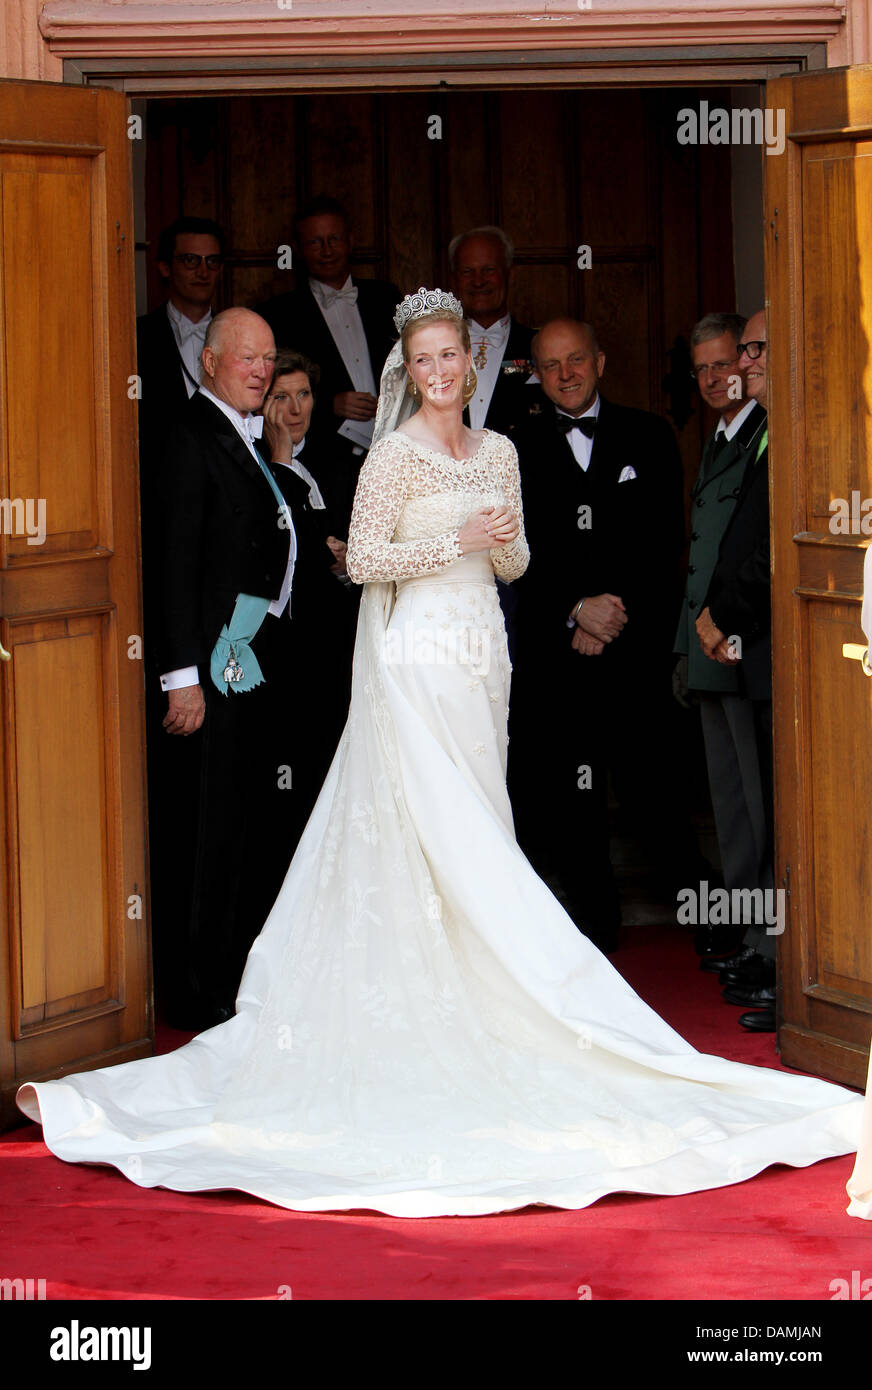 Princess Nathalie of Sayn-Wittgenstein-Berleburg and her father, Prince Richard of Sayn-Wittgenstein-Berleburg (L), arrive for her religious wedding with Alexander Johannsmann at the Evangelical Church of the castle in Bad Berleburg, Germany, 18 June 2011. The couple had a civil marriage on May 27th, 2010. Photo: Patrick van Katwijk NETHERLANDS OUT Stock Photo